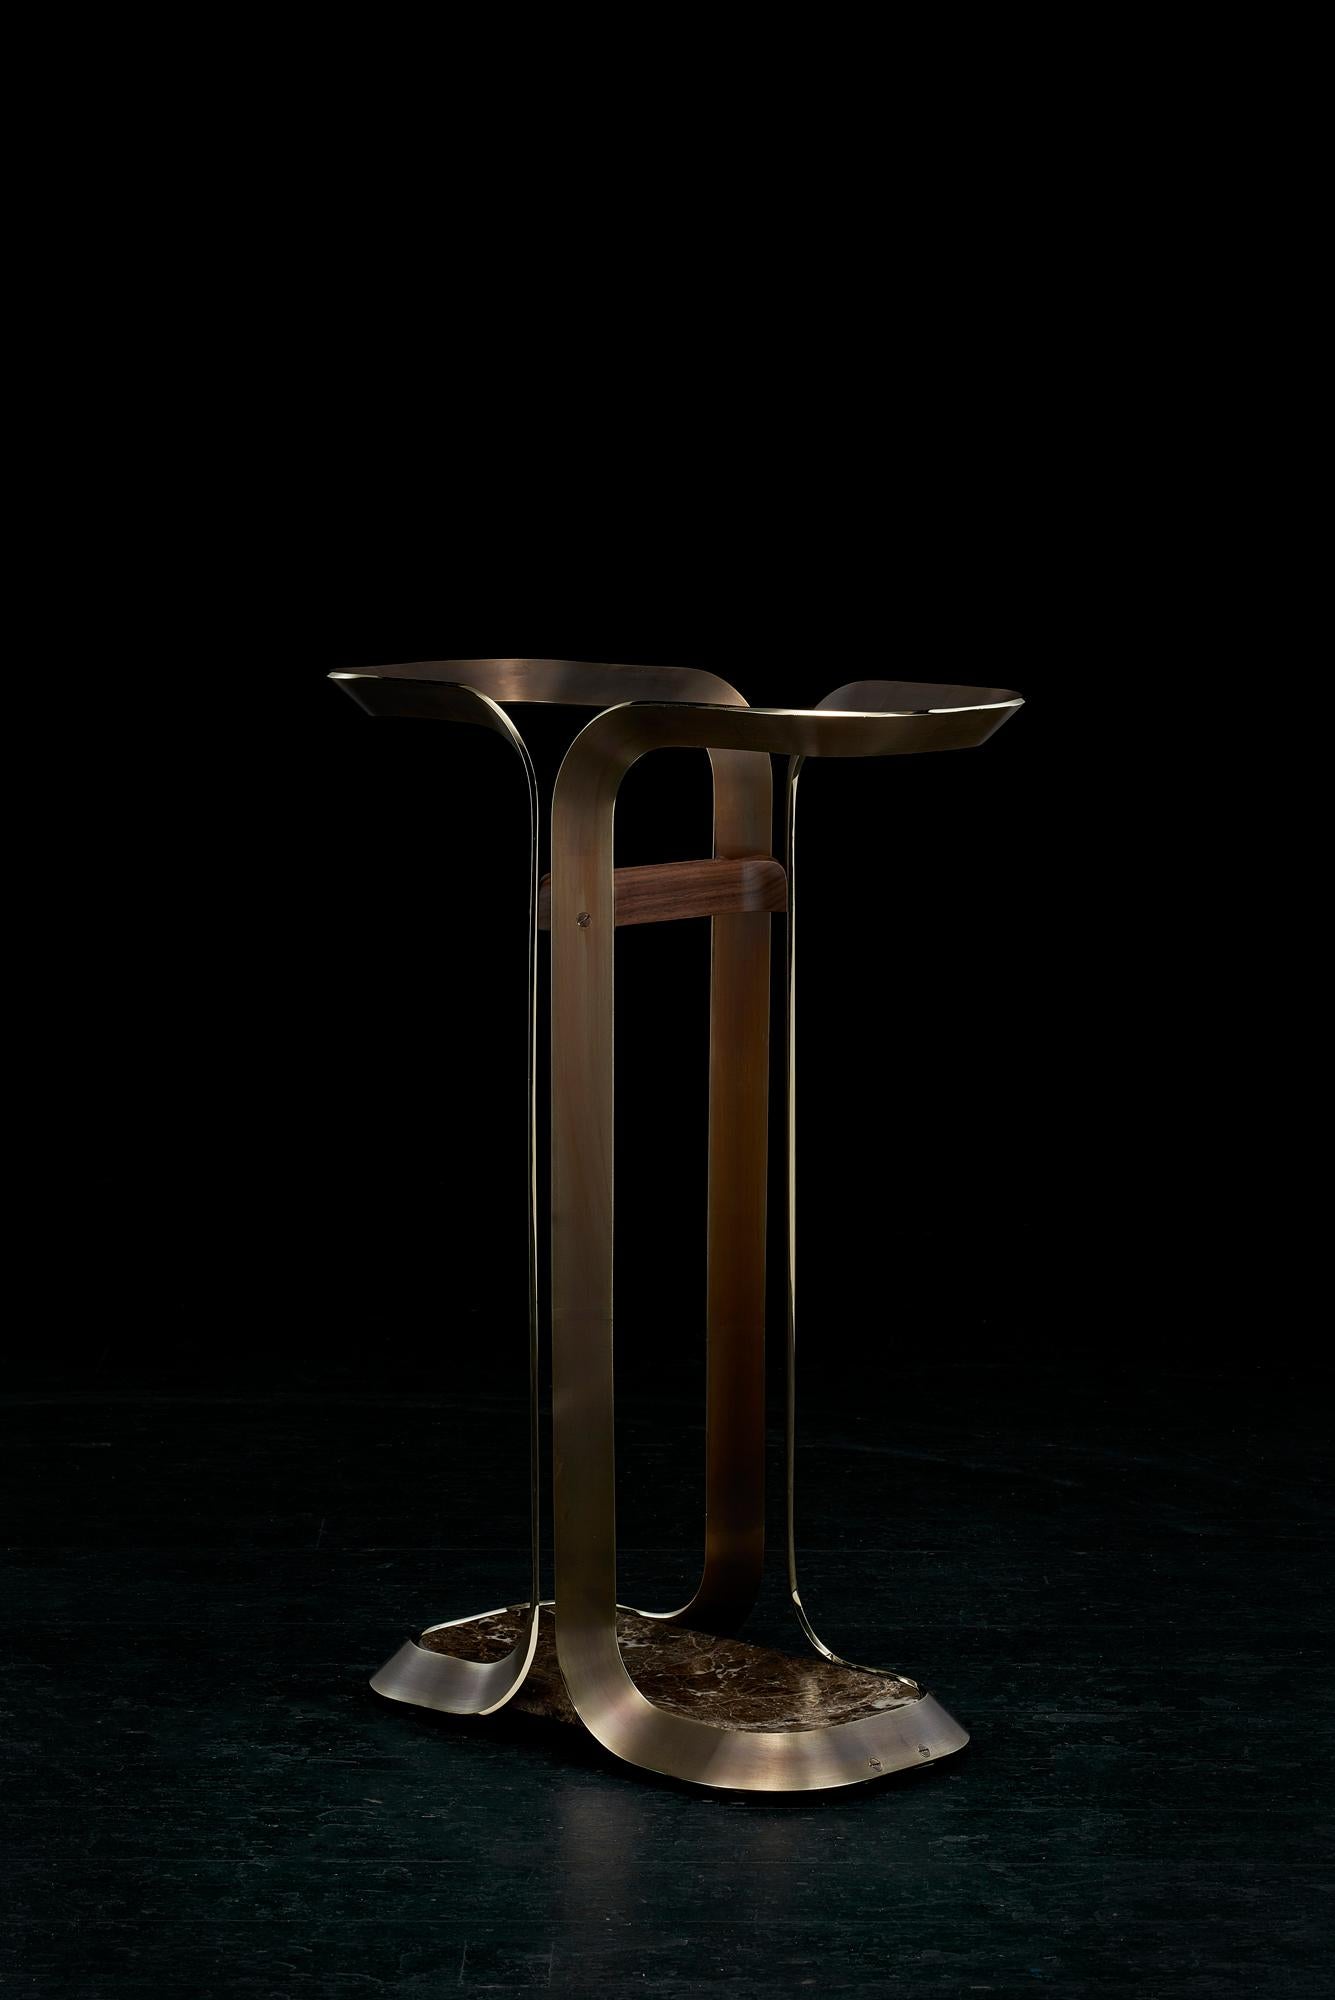 The Honorific umbrella stand is hand crafted in brushed and patinated solid brass with polished edges. 

The two tone finish adds depth to the material and beautifully reflects your foyer or vestibule.

The brass here, as in all our products, is